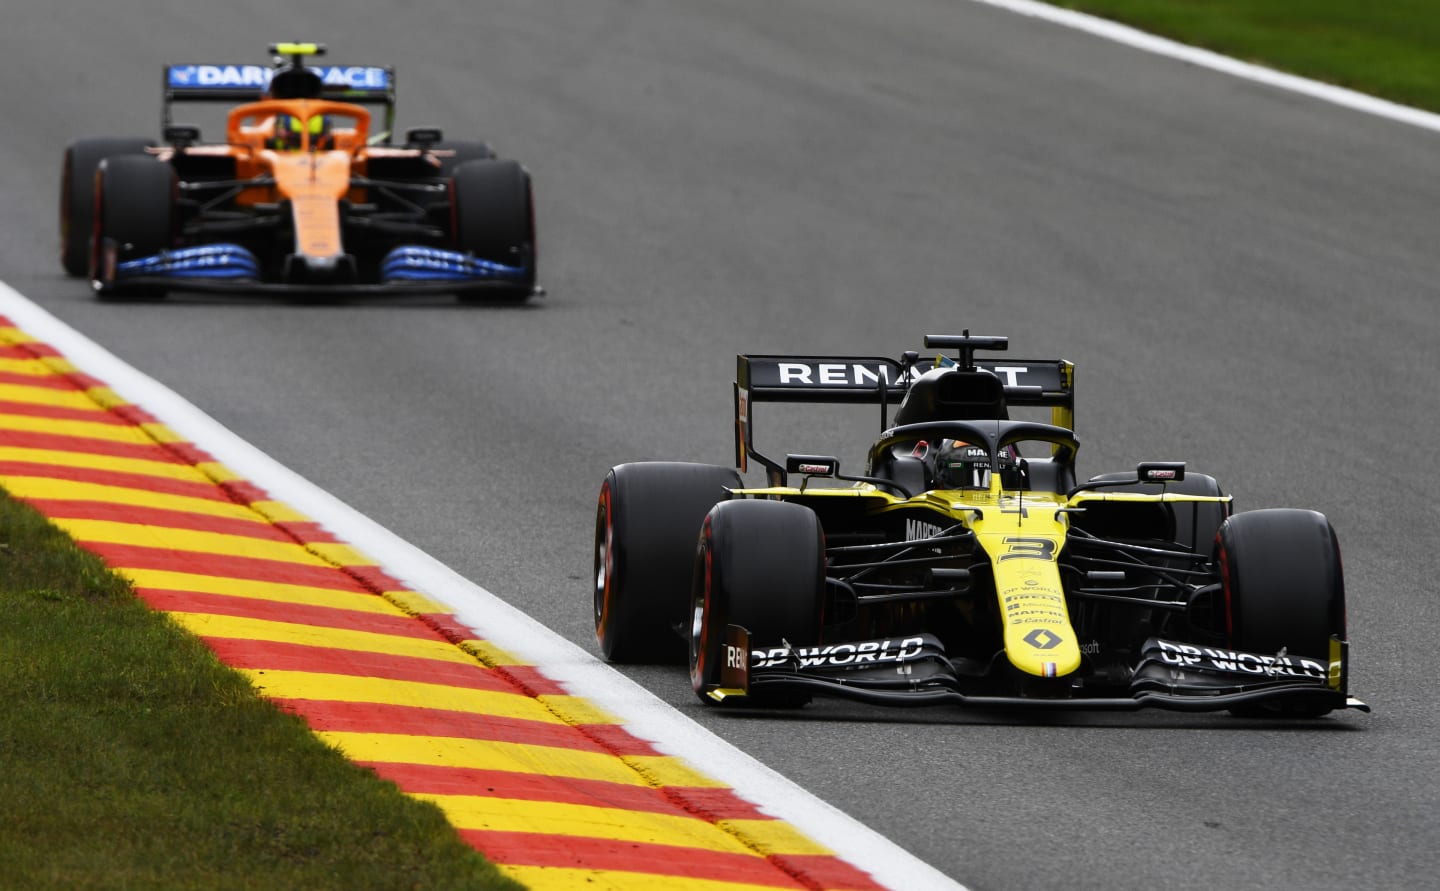 SPA, BELGIUM - AUGUST 28: Daniel Ricciardo of Australia driving the (3) Renault Sport Formula One Team RS20 drives during practice for the F1 Grand Prix of Belgium at Circuit de Spa-Francorchamps on August 28, 2020 in Spa, Belgium. (Photo by Rudy Carezzevoli/Getty Images)